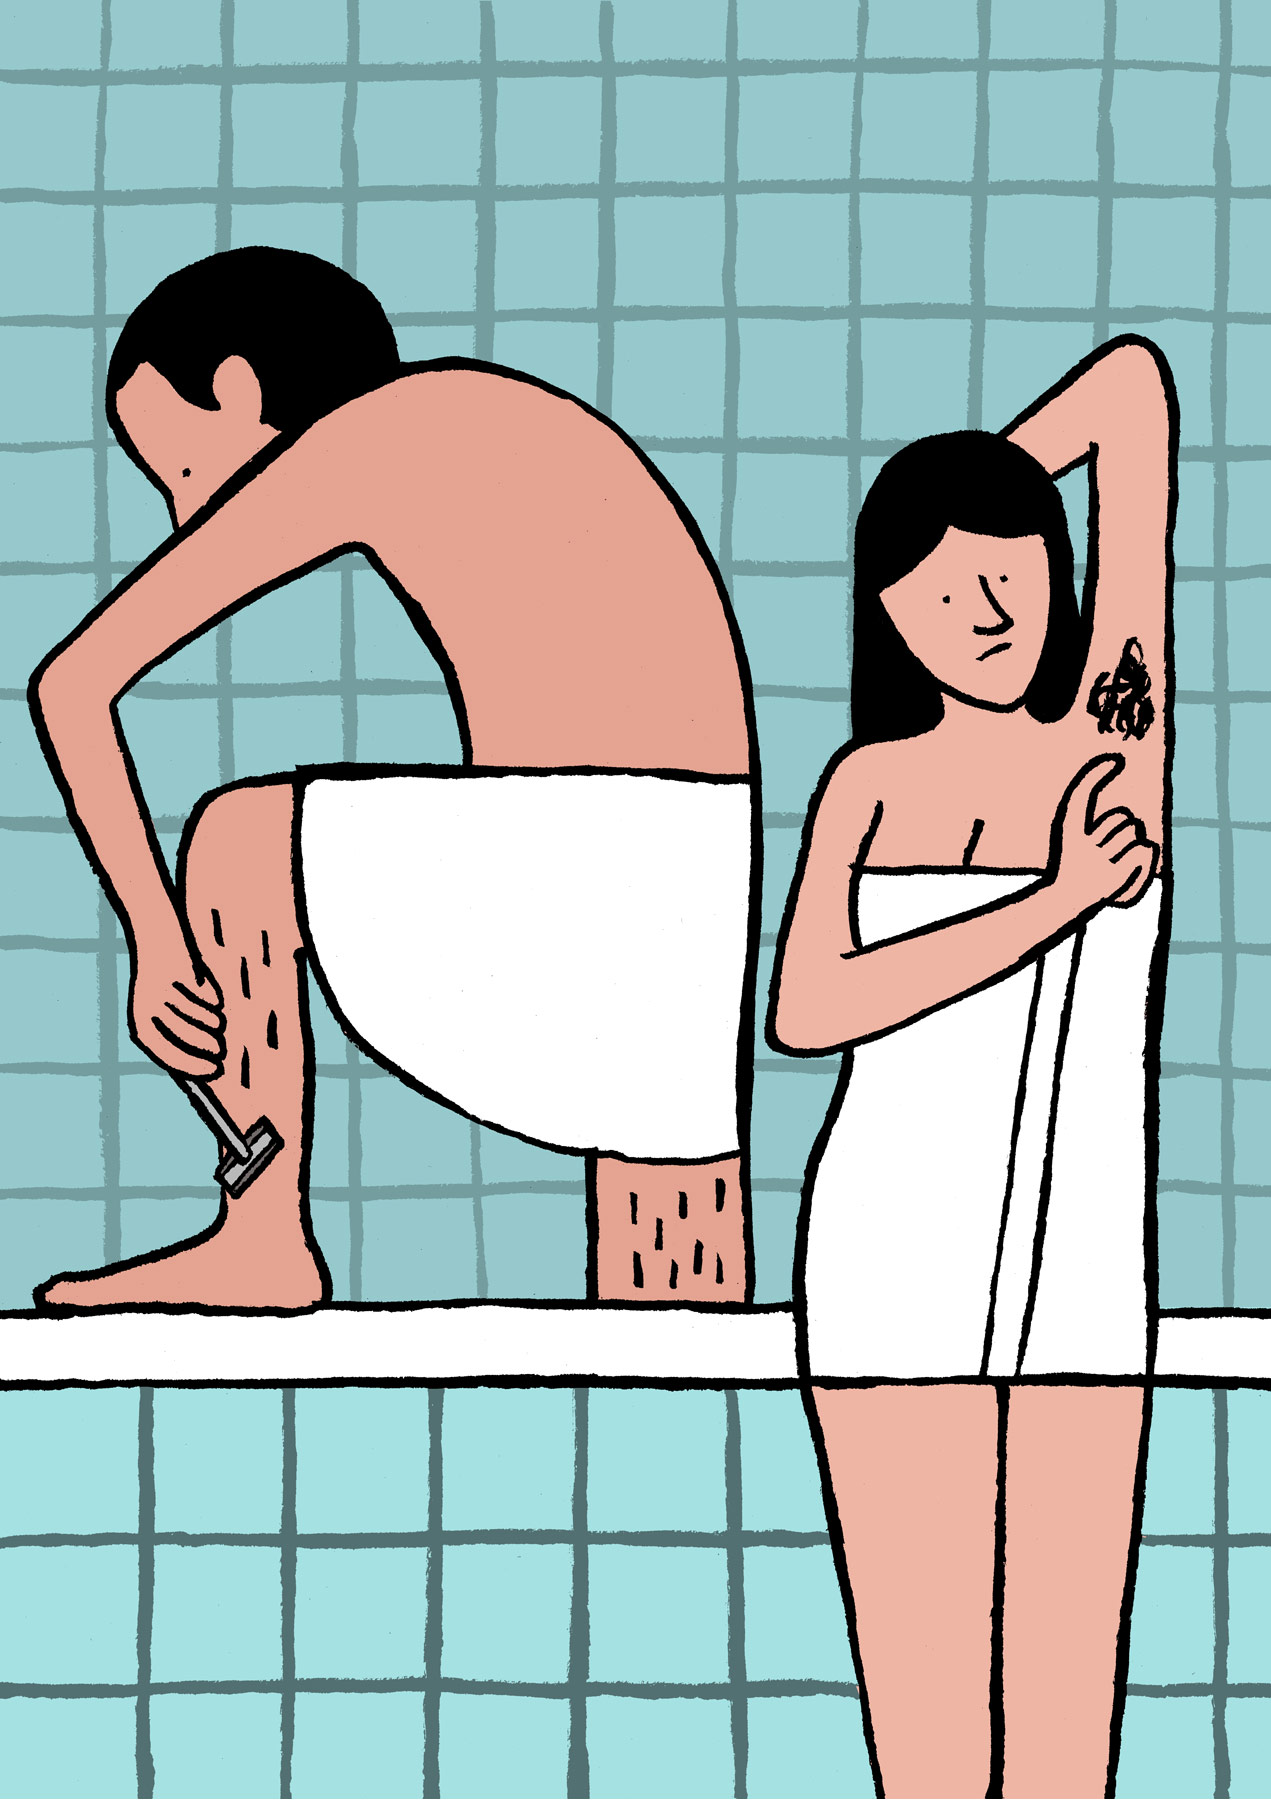 Morning Routine: A couple in a bathroom together. The woman has armpit hair and the man is shaving his legs.